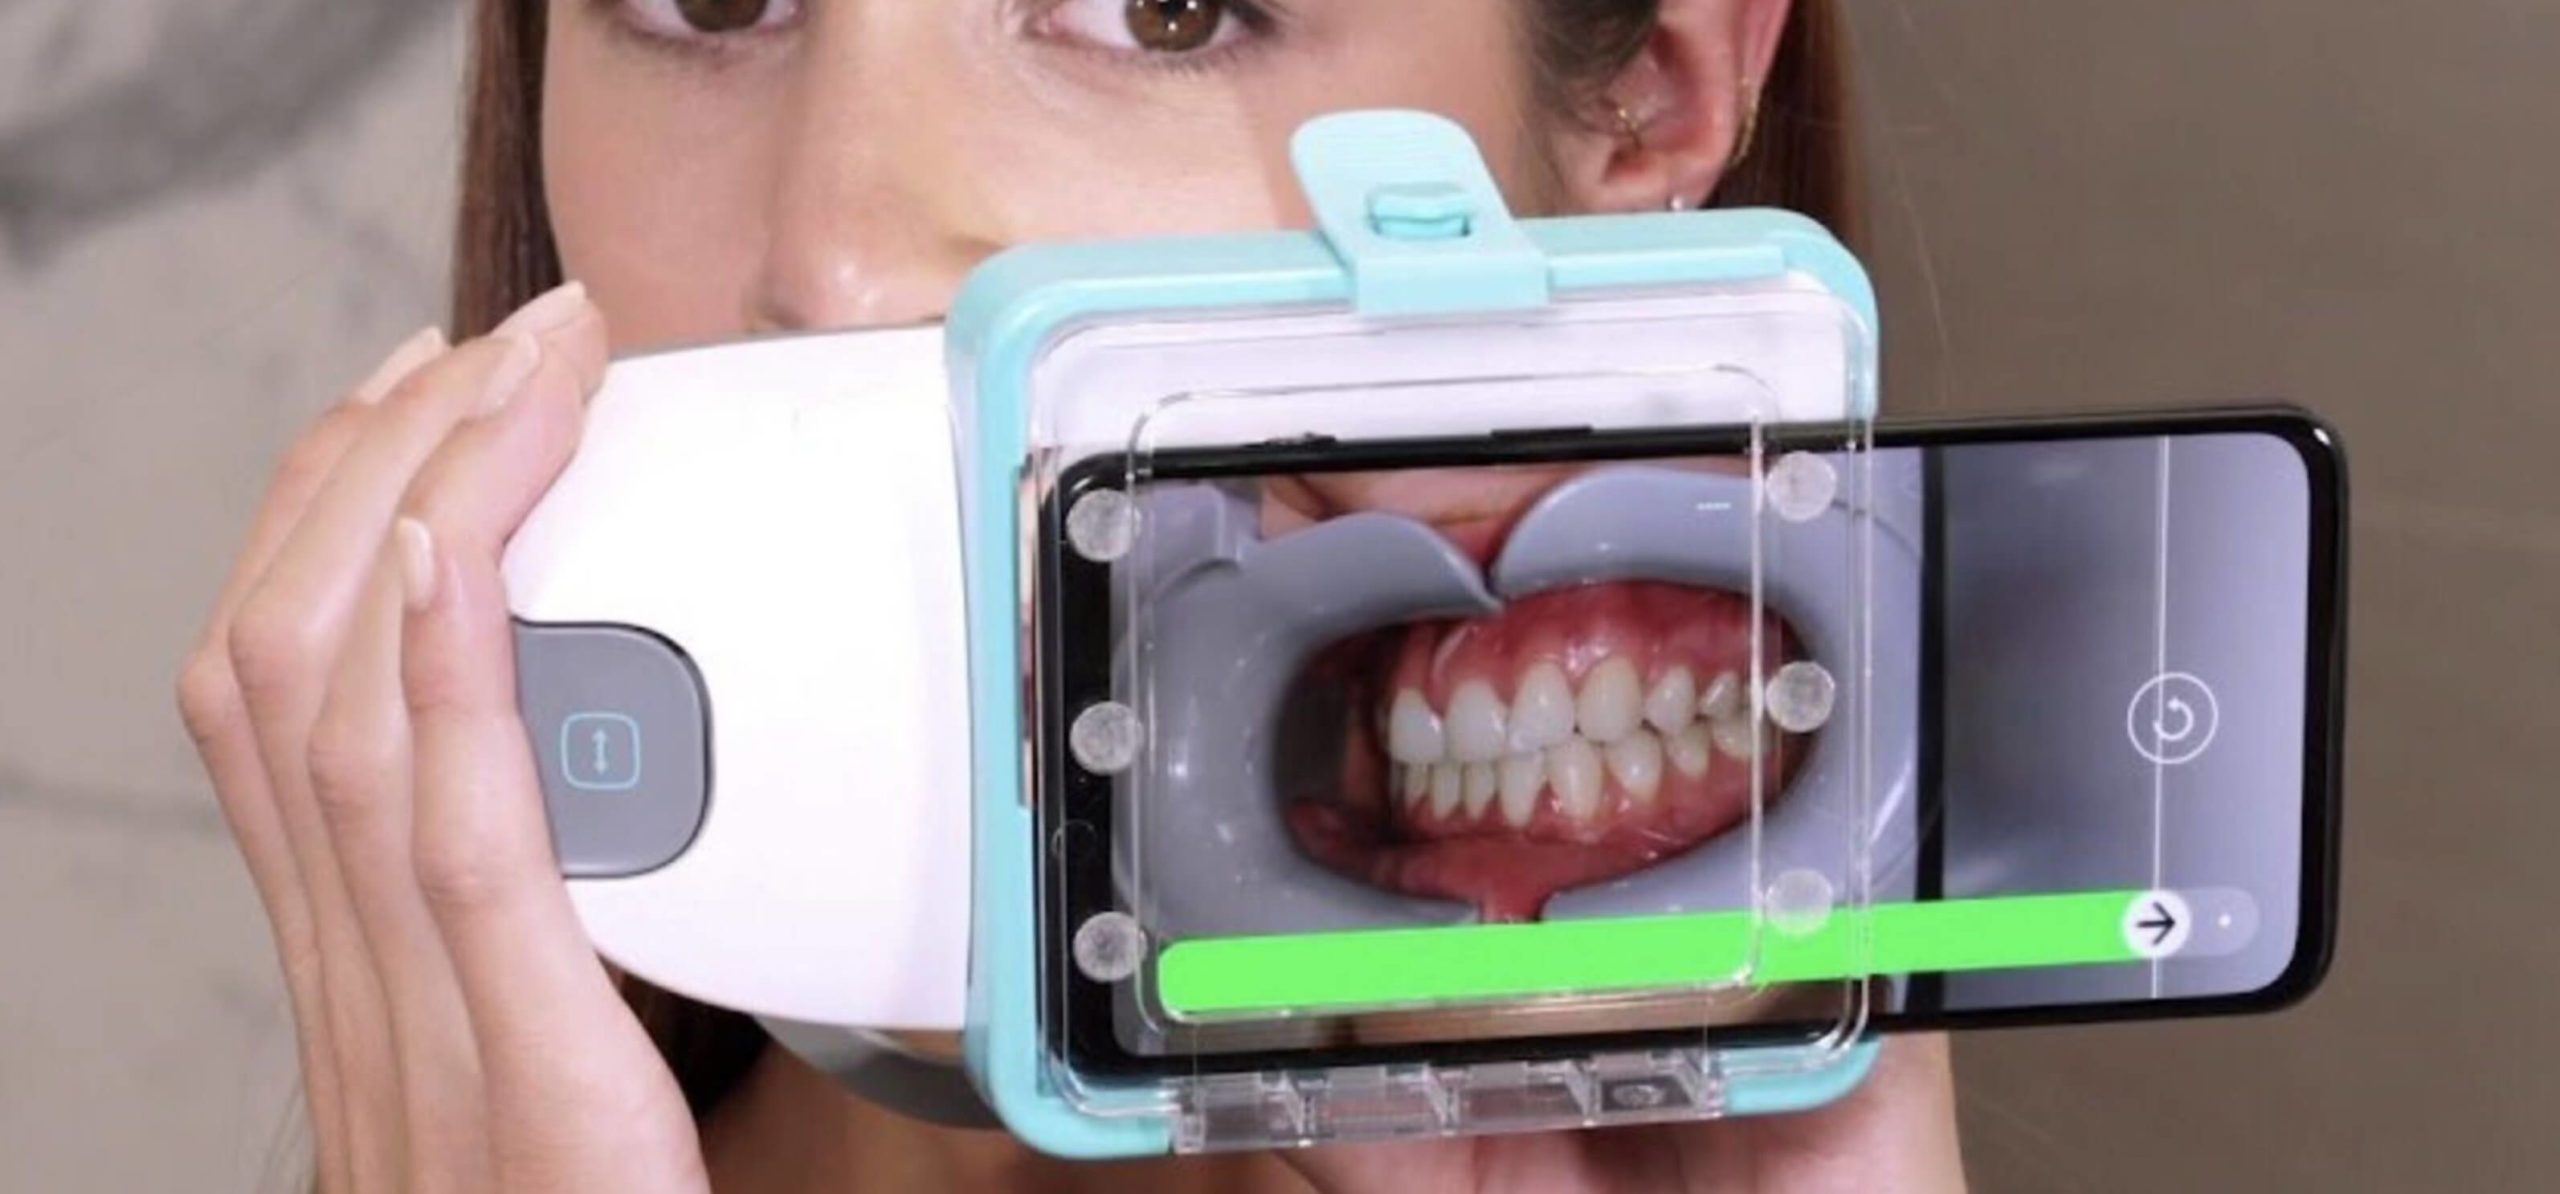 clear aligners patient using the dental monitoring app